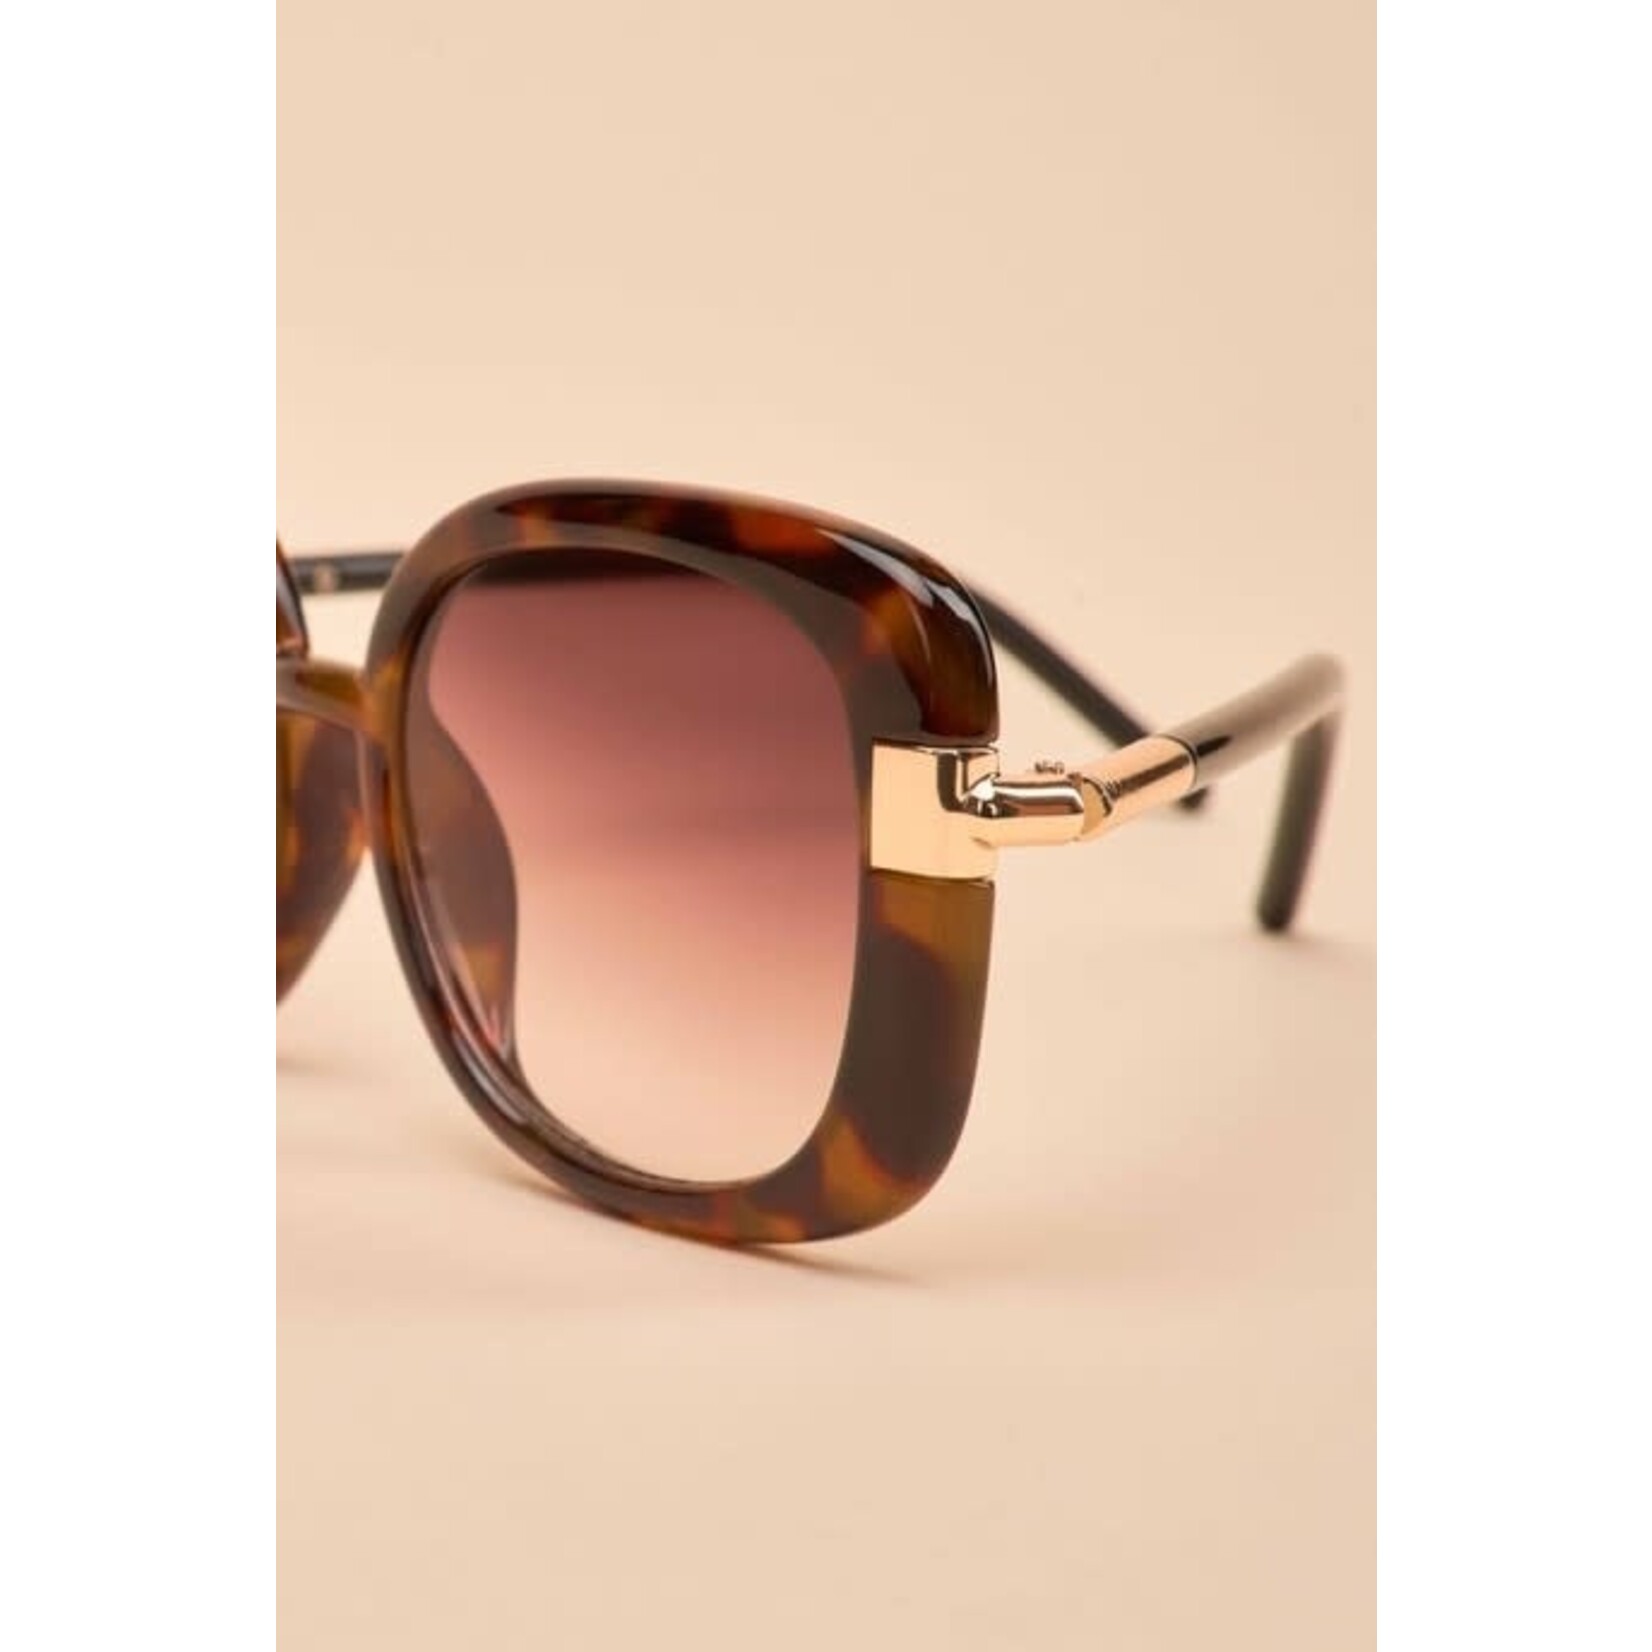 Powder Paige Limited Edition Sunglasses in Mahogany